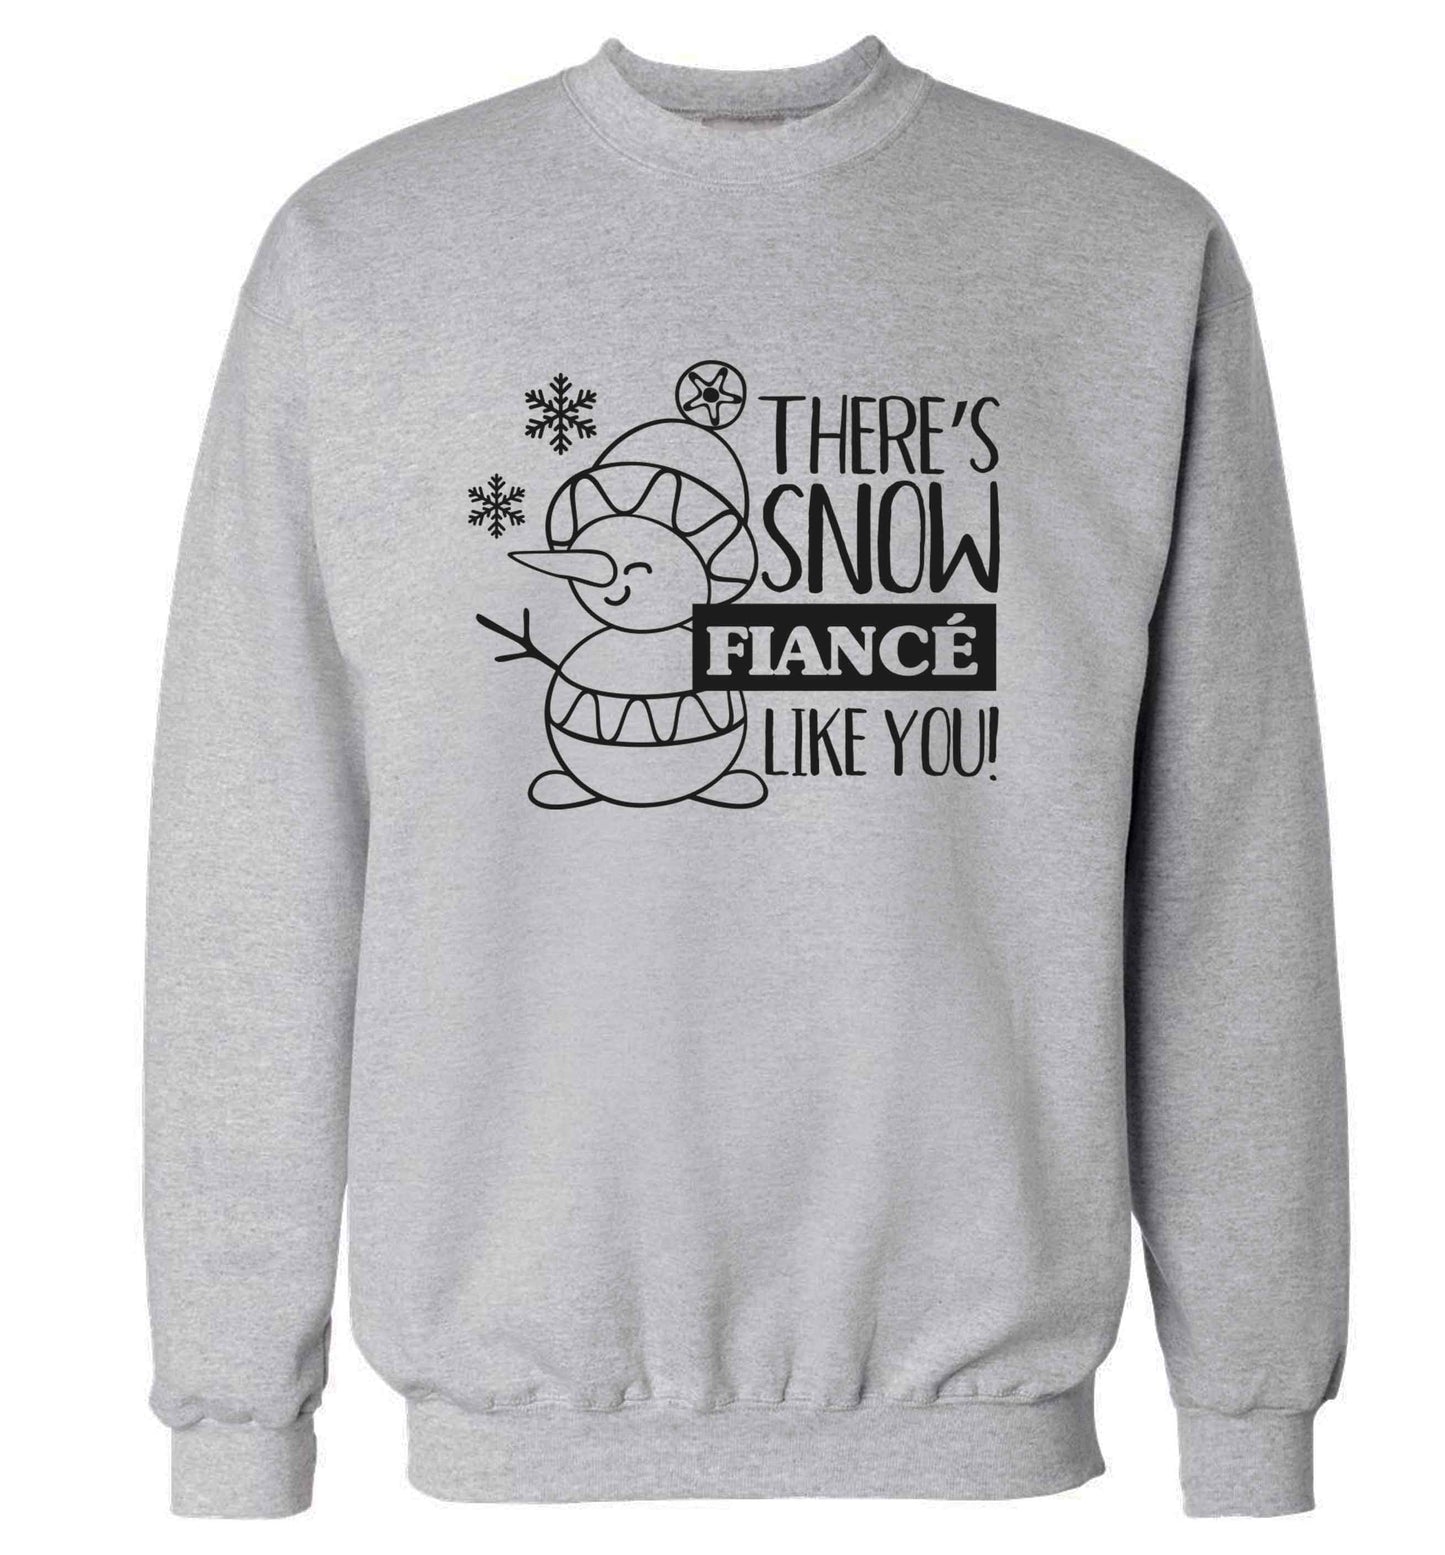 There's snow fiance like you adult's unisex grey sweater 2XL